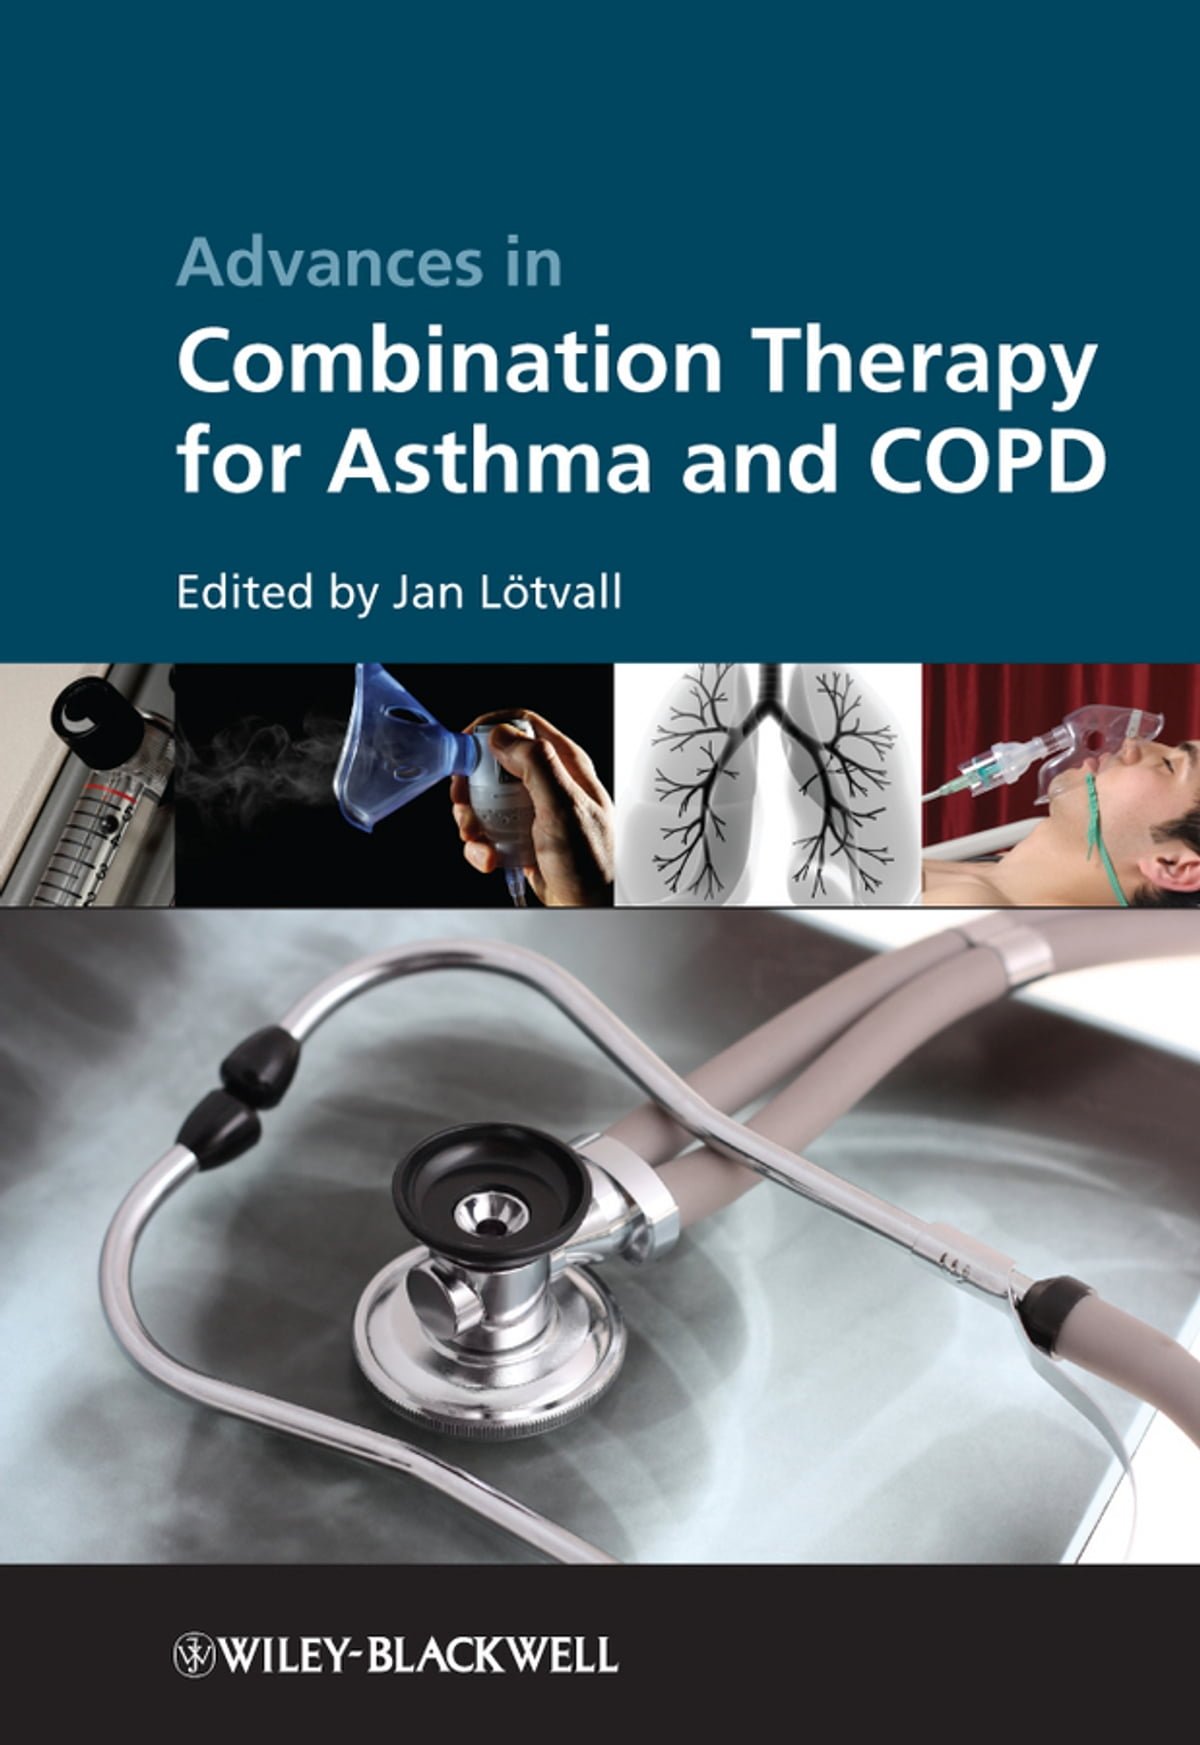 advances-in-combination-therapy-for-asthma-and-copd.jpg